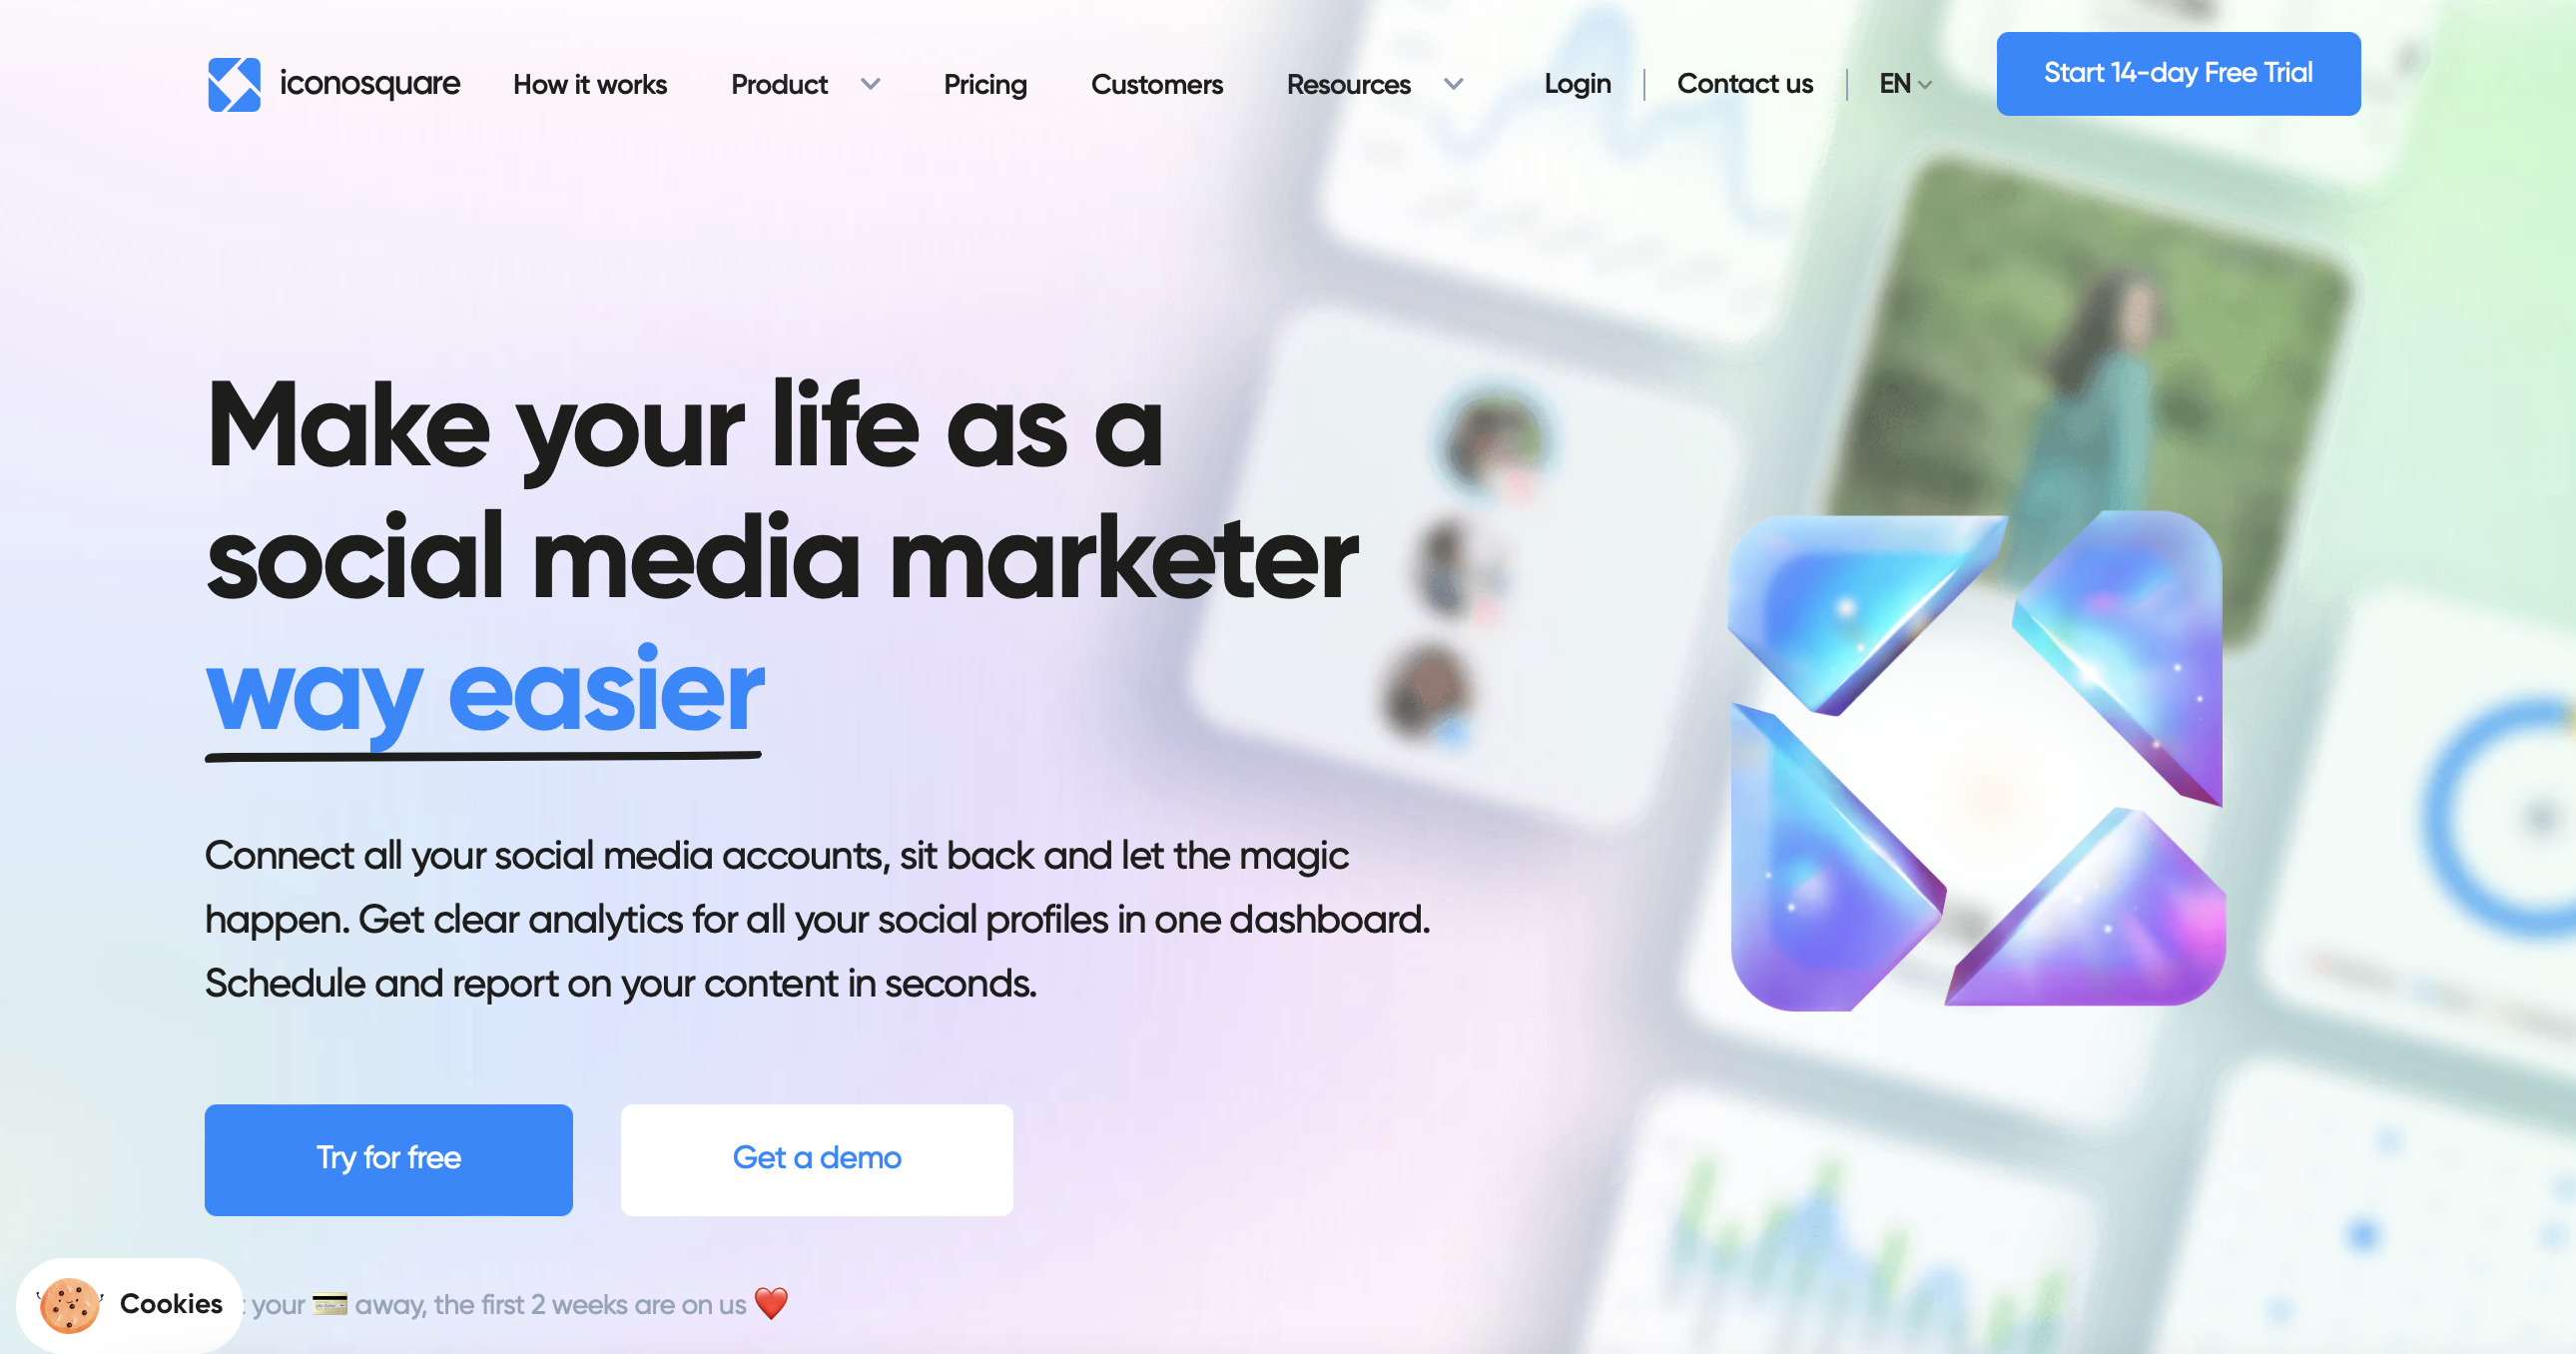 iconosquare homepage showing a 3D rendering of the brand logo next to text that reads "make your life as a social media marketer way easier"